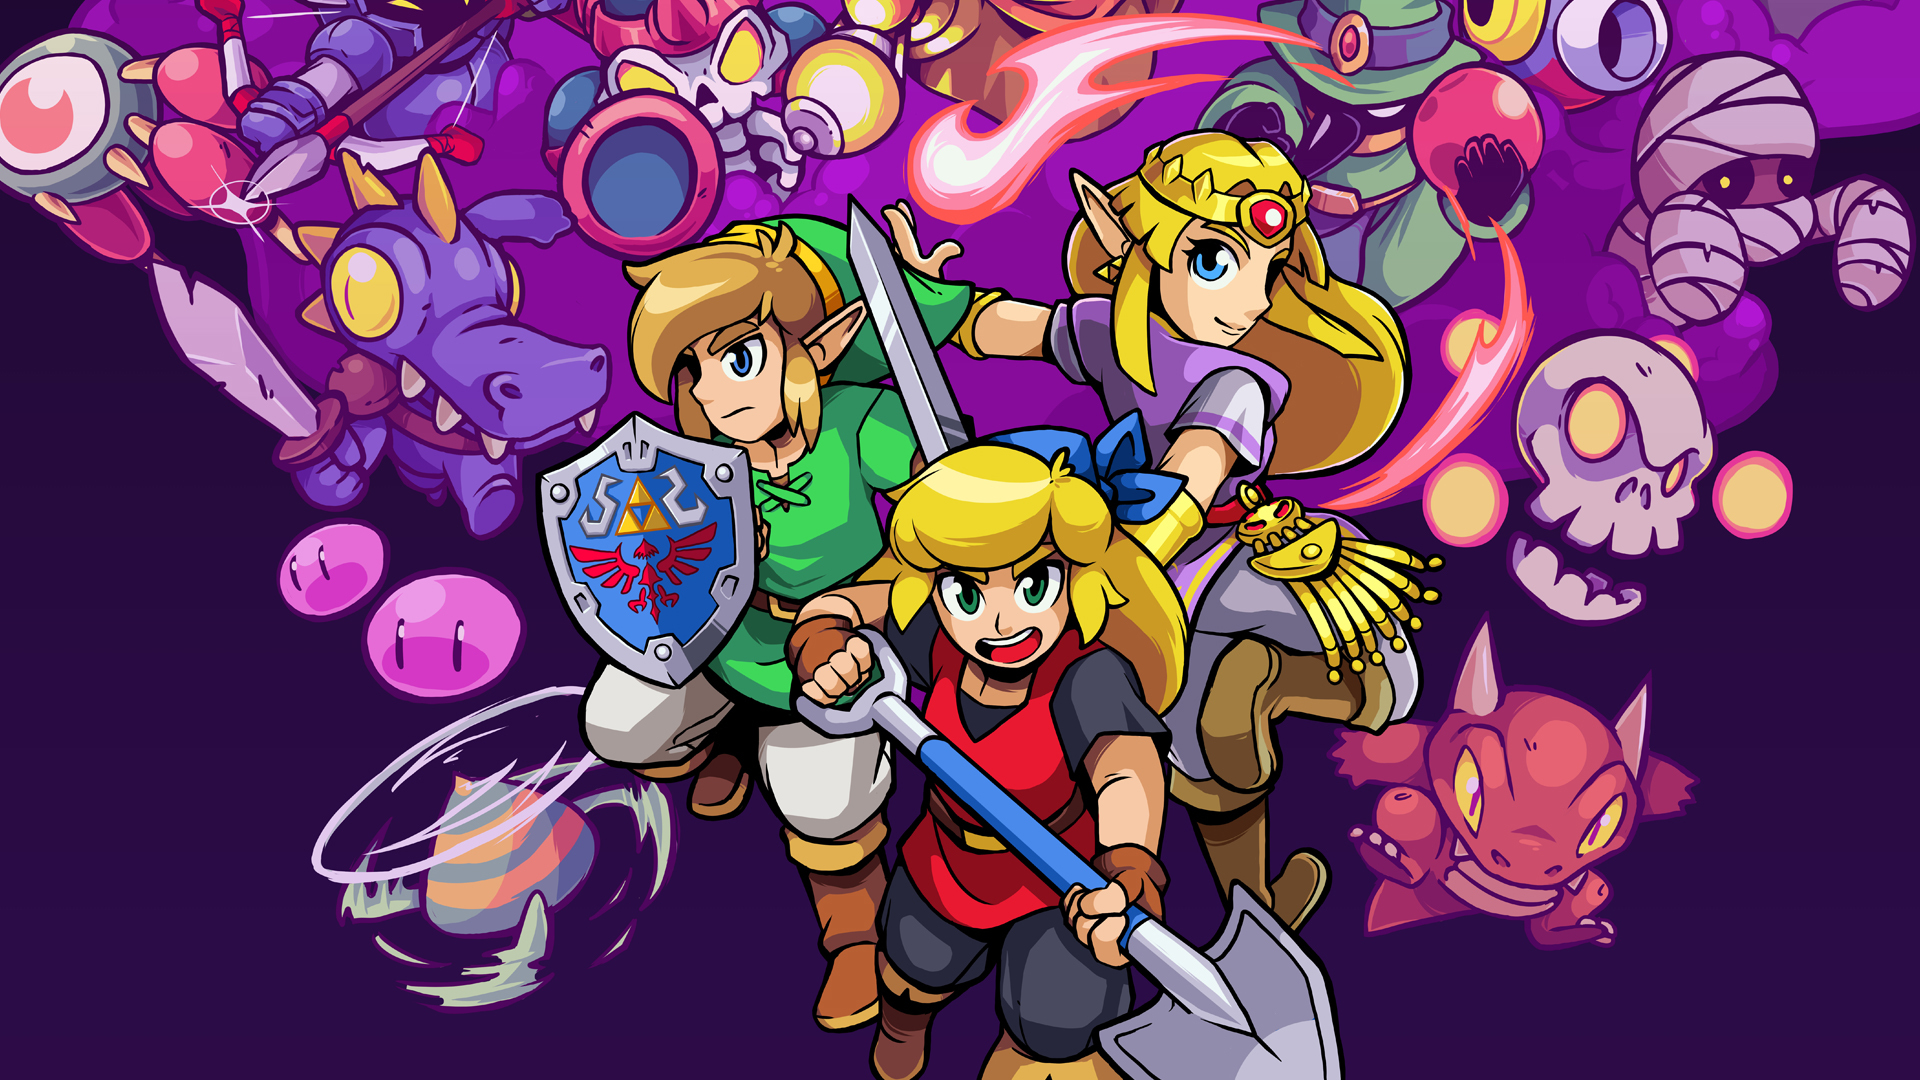 download free cadence hyrule